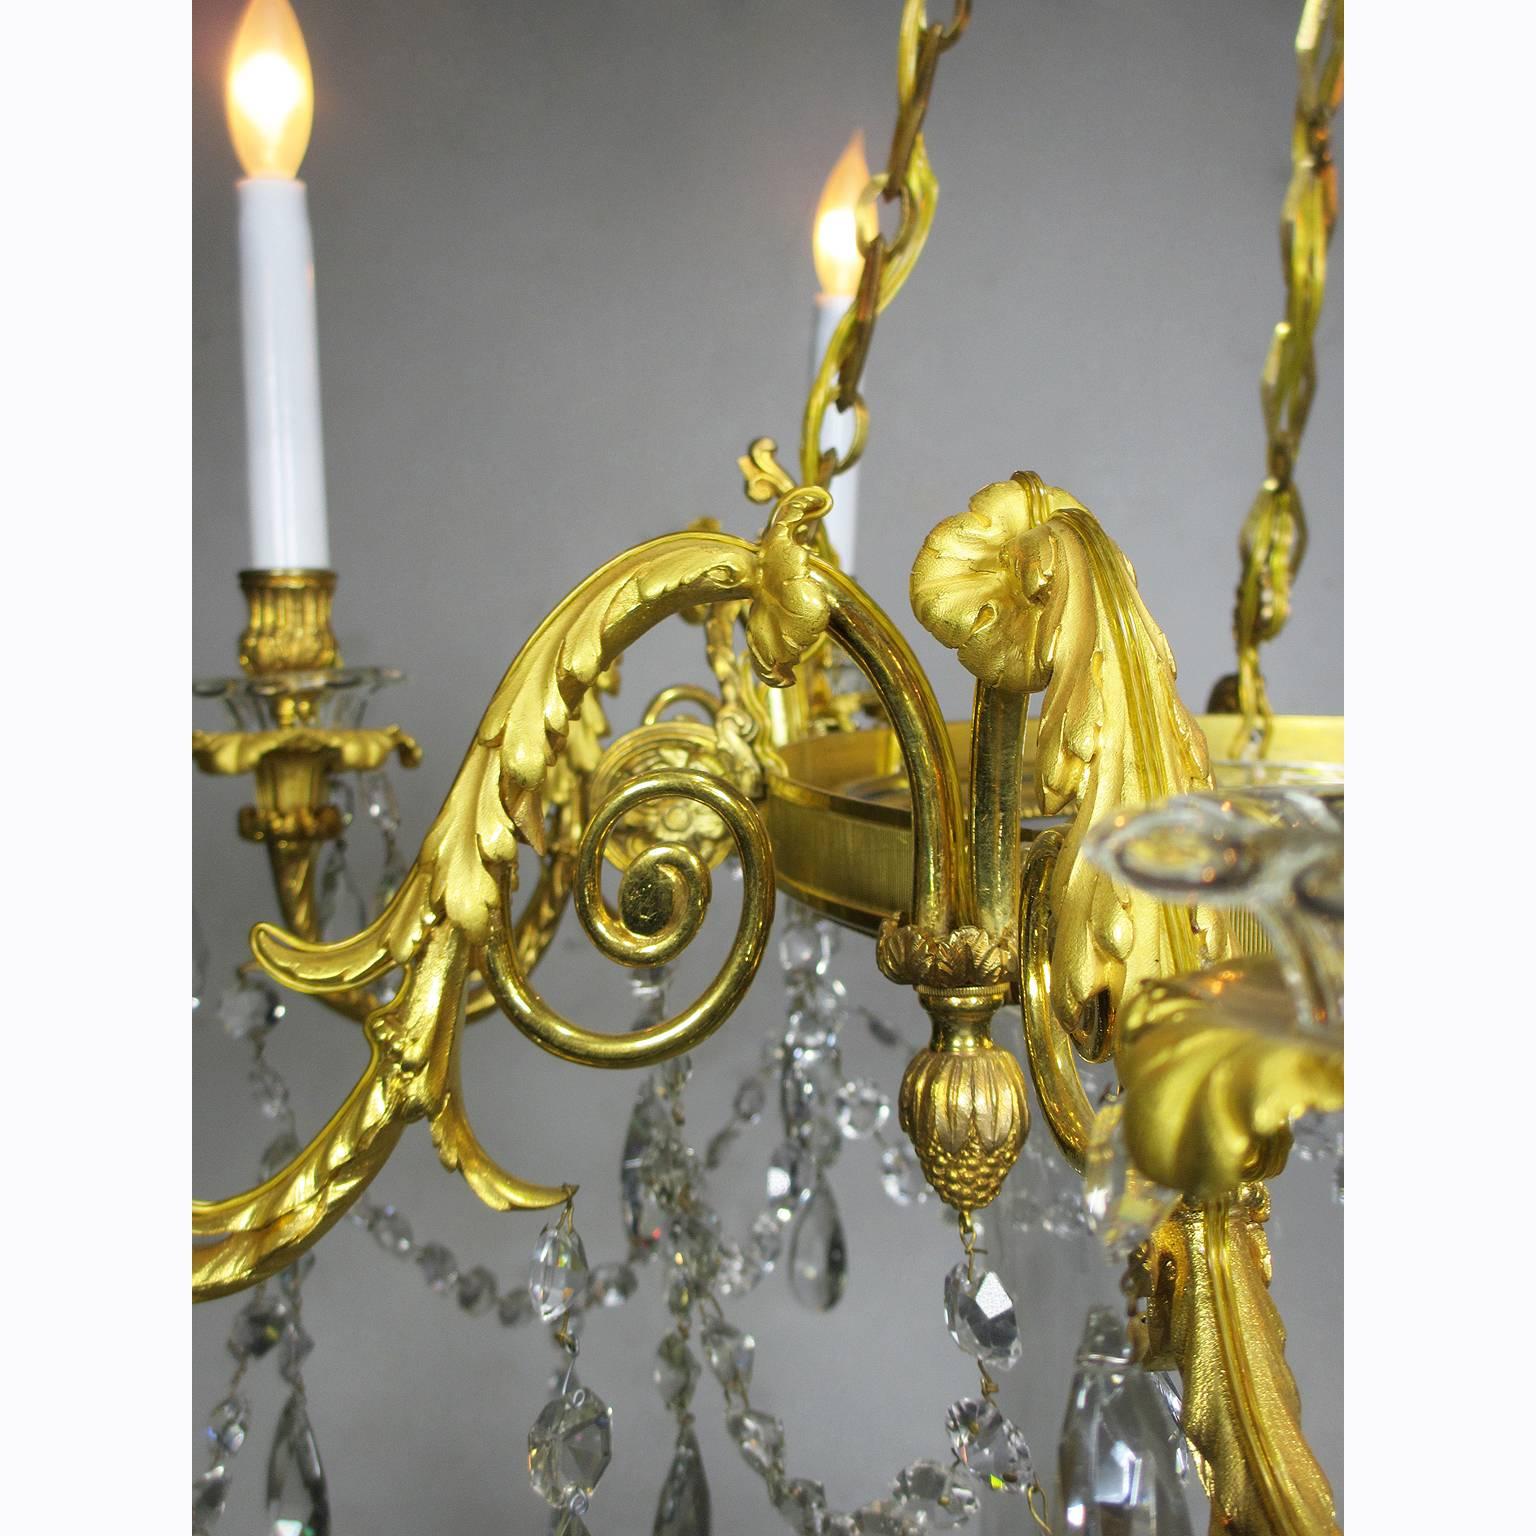 19th Century Louis XV Style Ormolu and Cut-Glass Chandelier by Mottheau et Fils In Good Condition For Sale In Los Angeles, CA